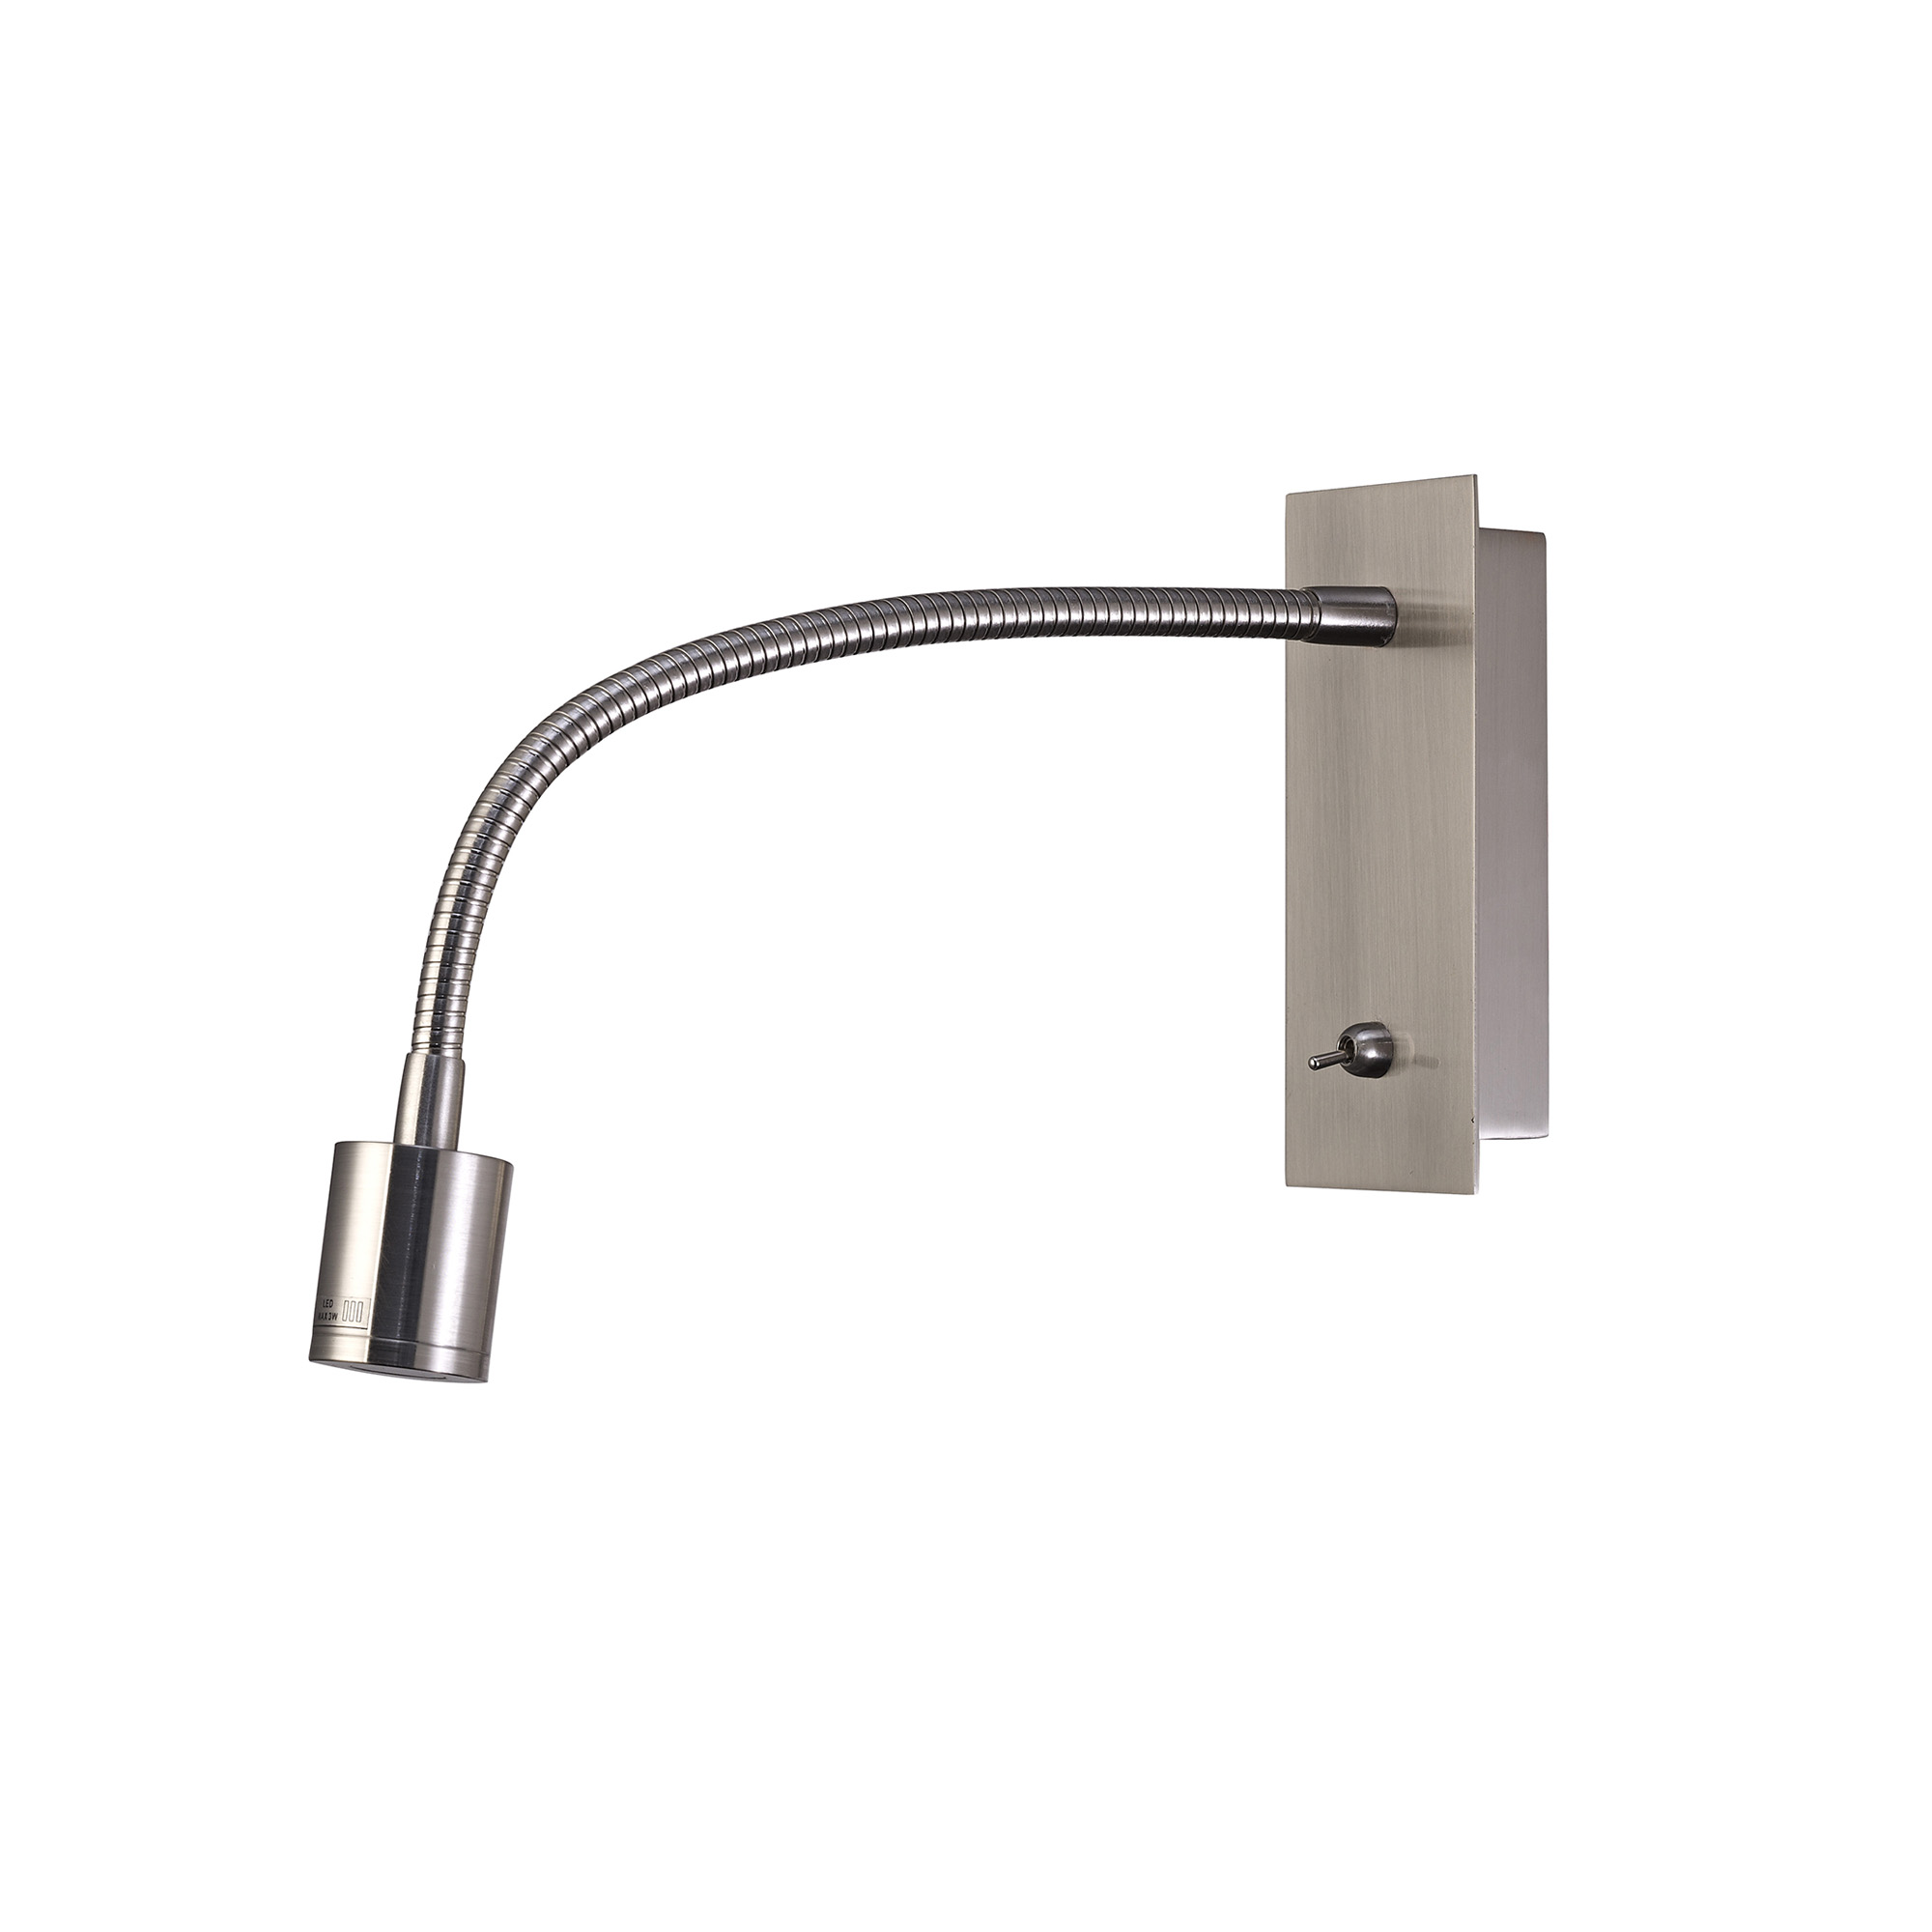 D0207  Winslow 3W LED Switched Wall Lamp Satin Nickel